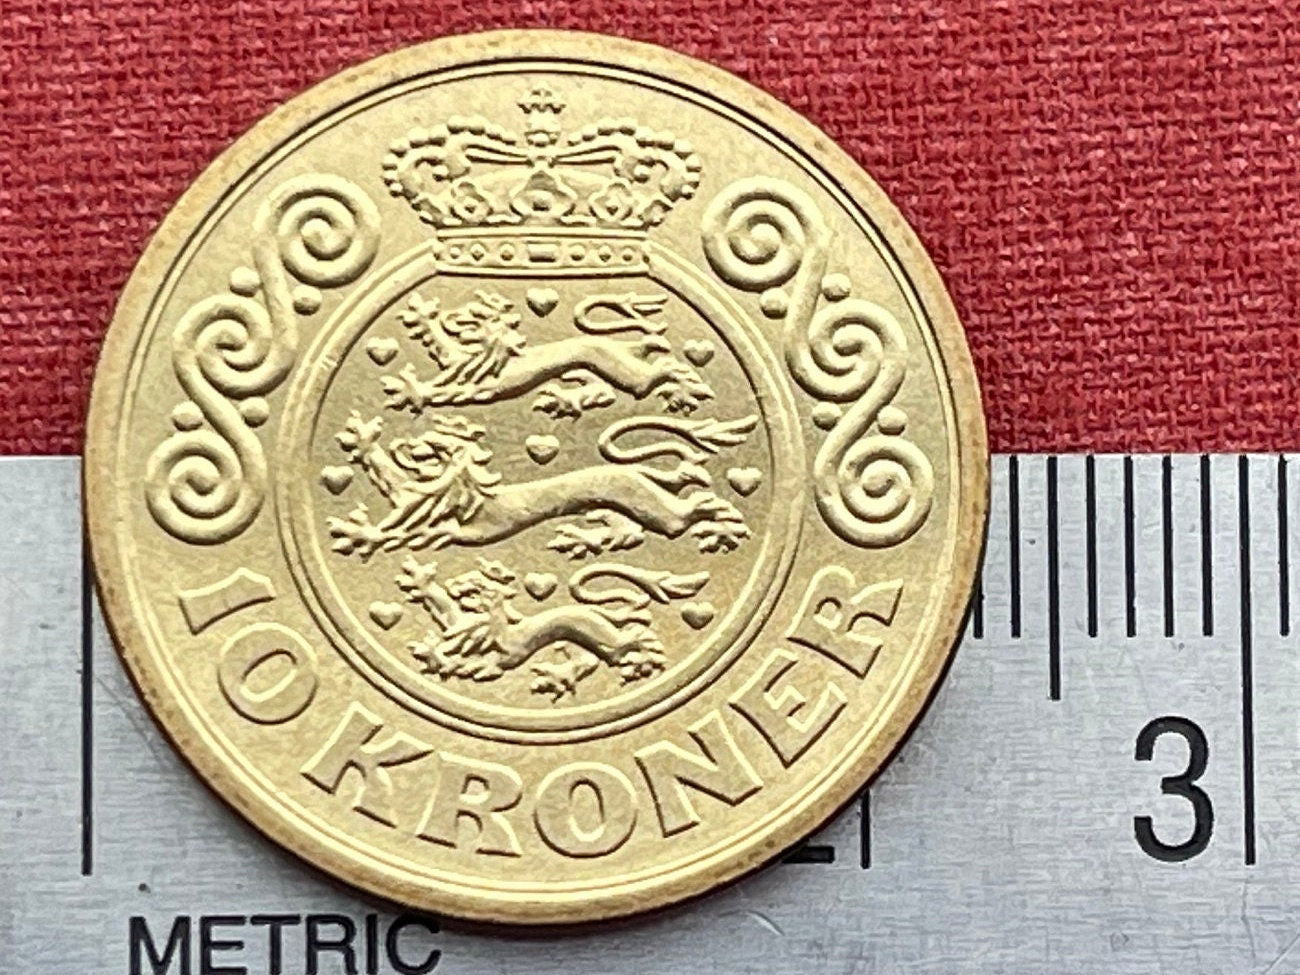 Queen Margrethe II 10 Kroner Denmark Authentic Coin Money for Jewelry and Craft Making (Three Lions)